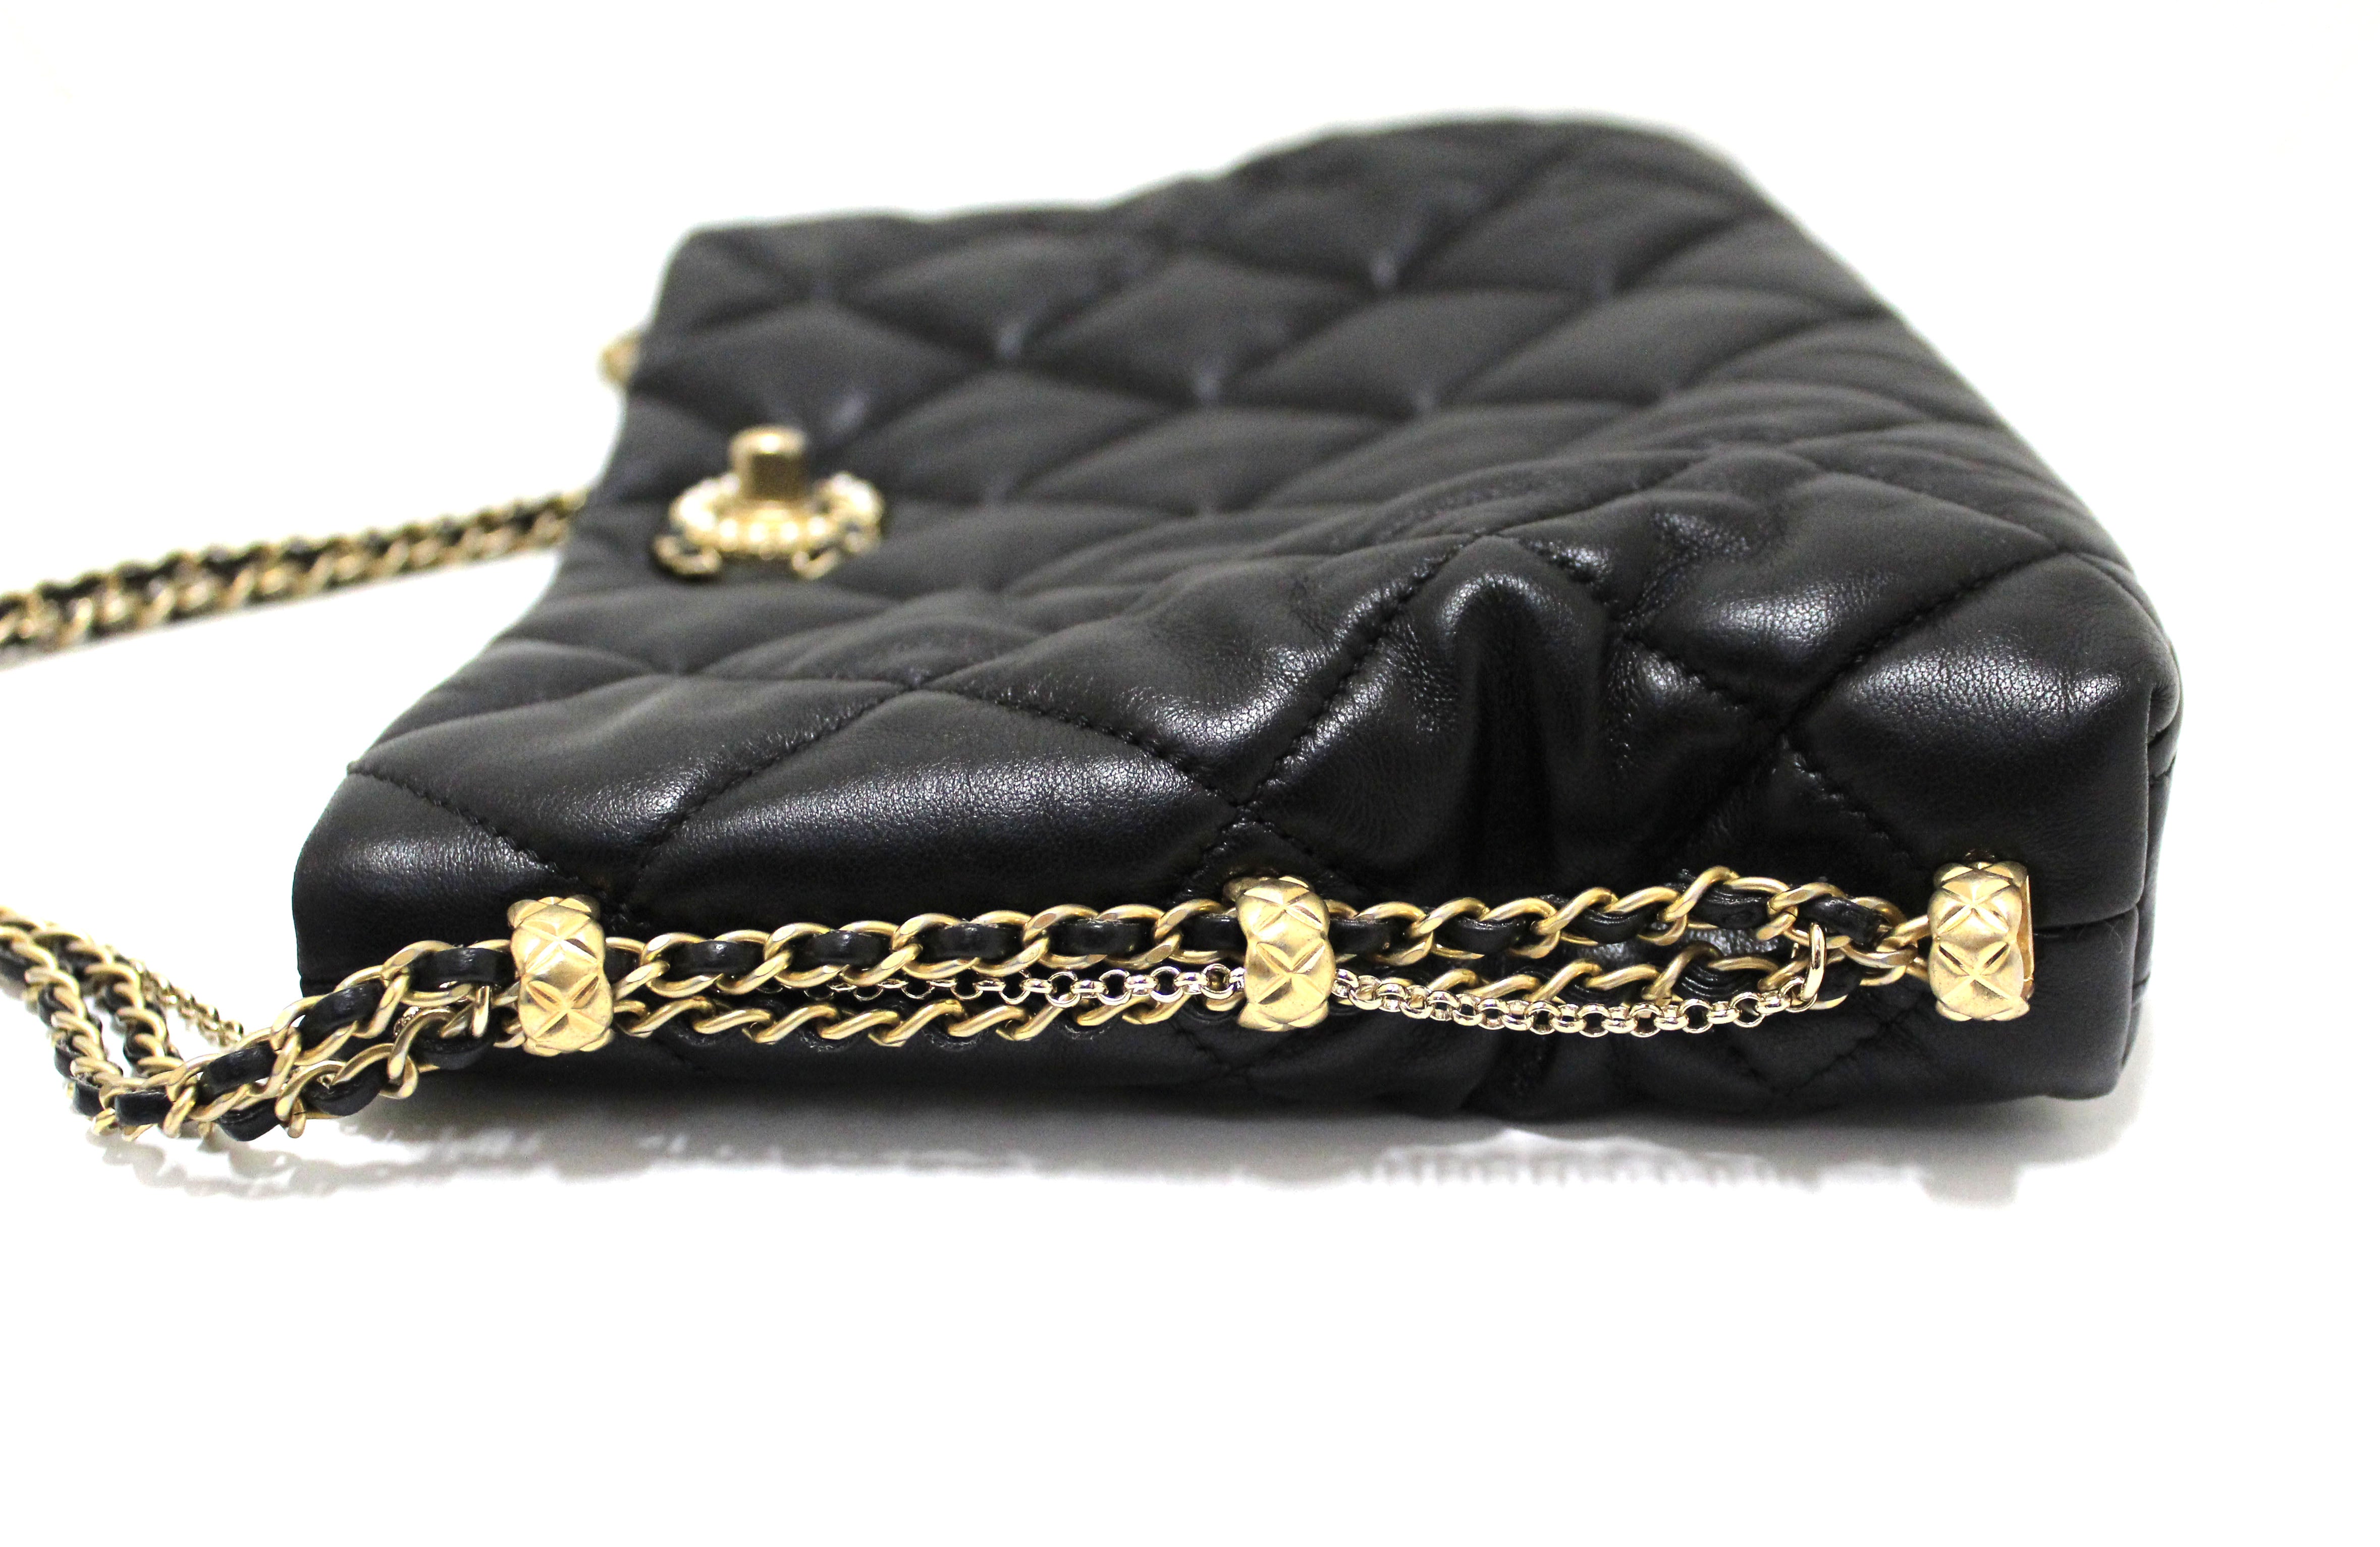 Chanel Black Quilted Leather Large Chain Me Hobo Chanel